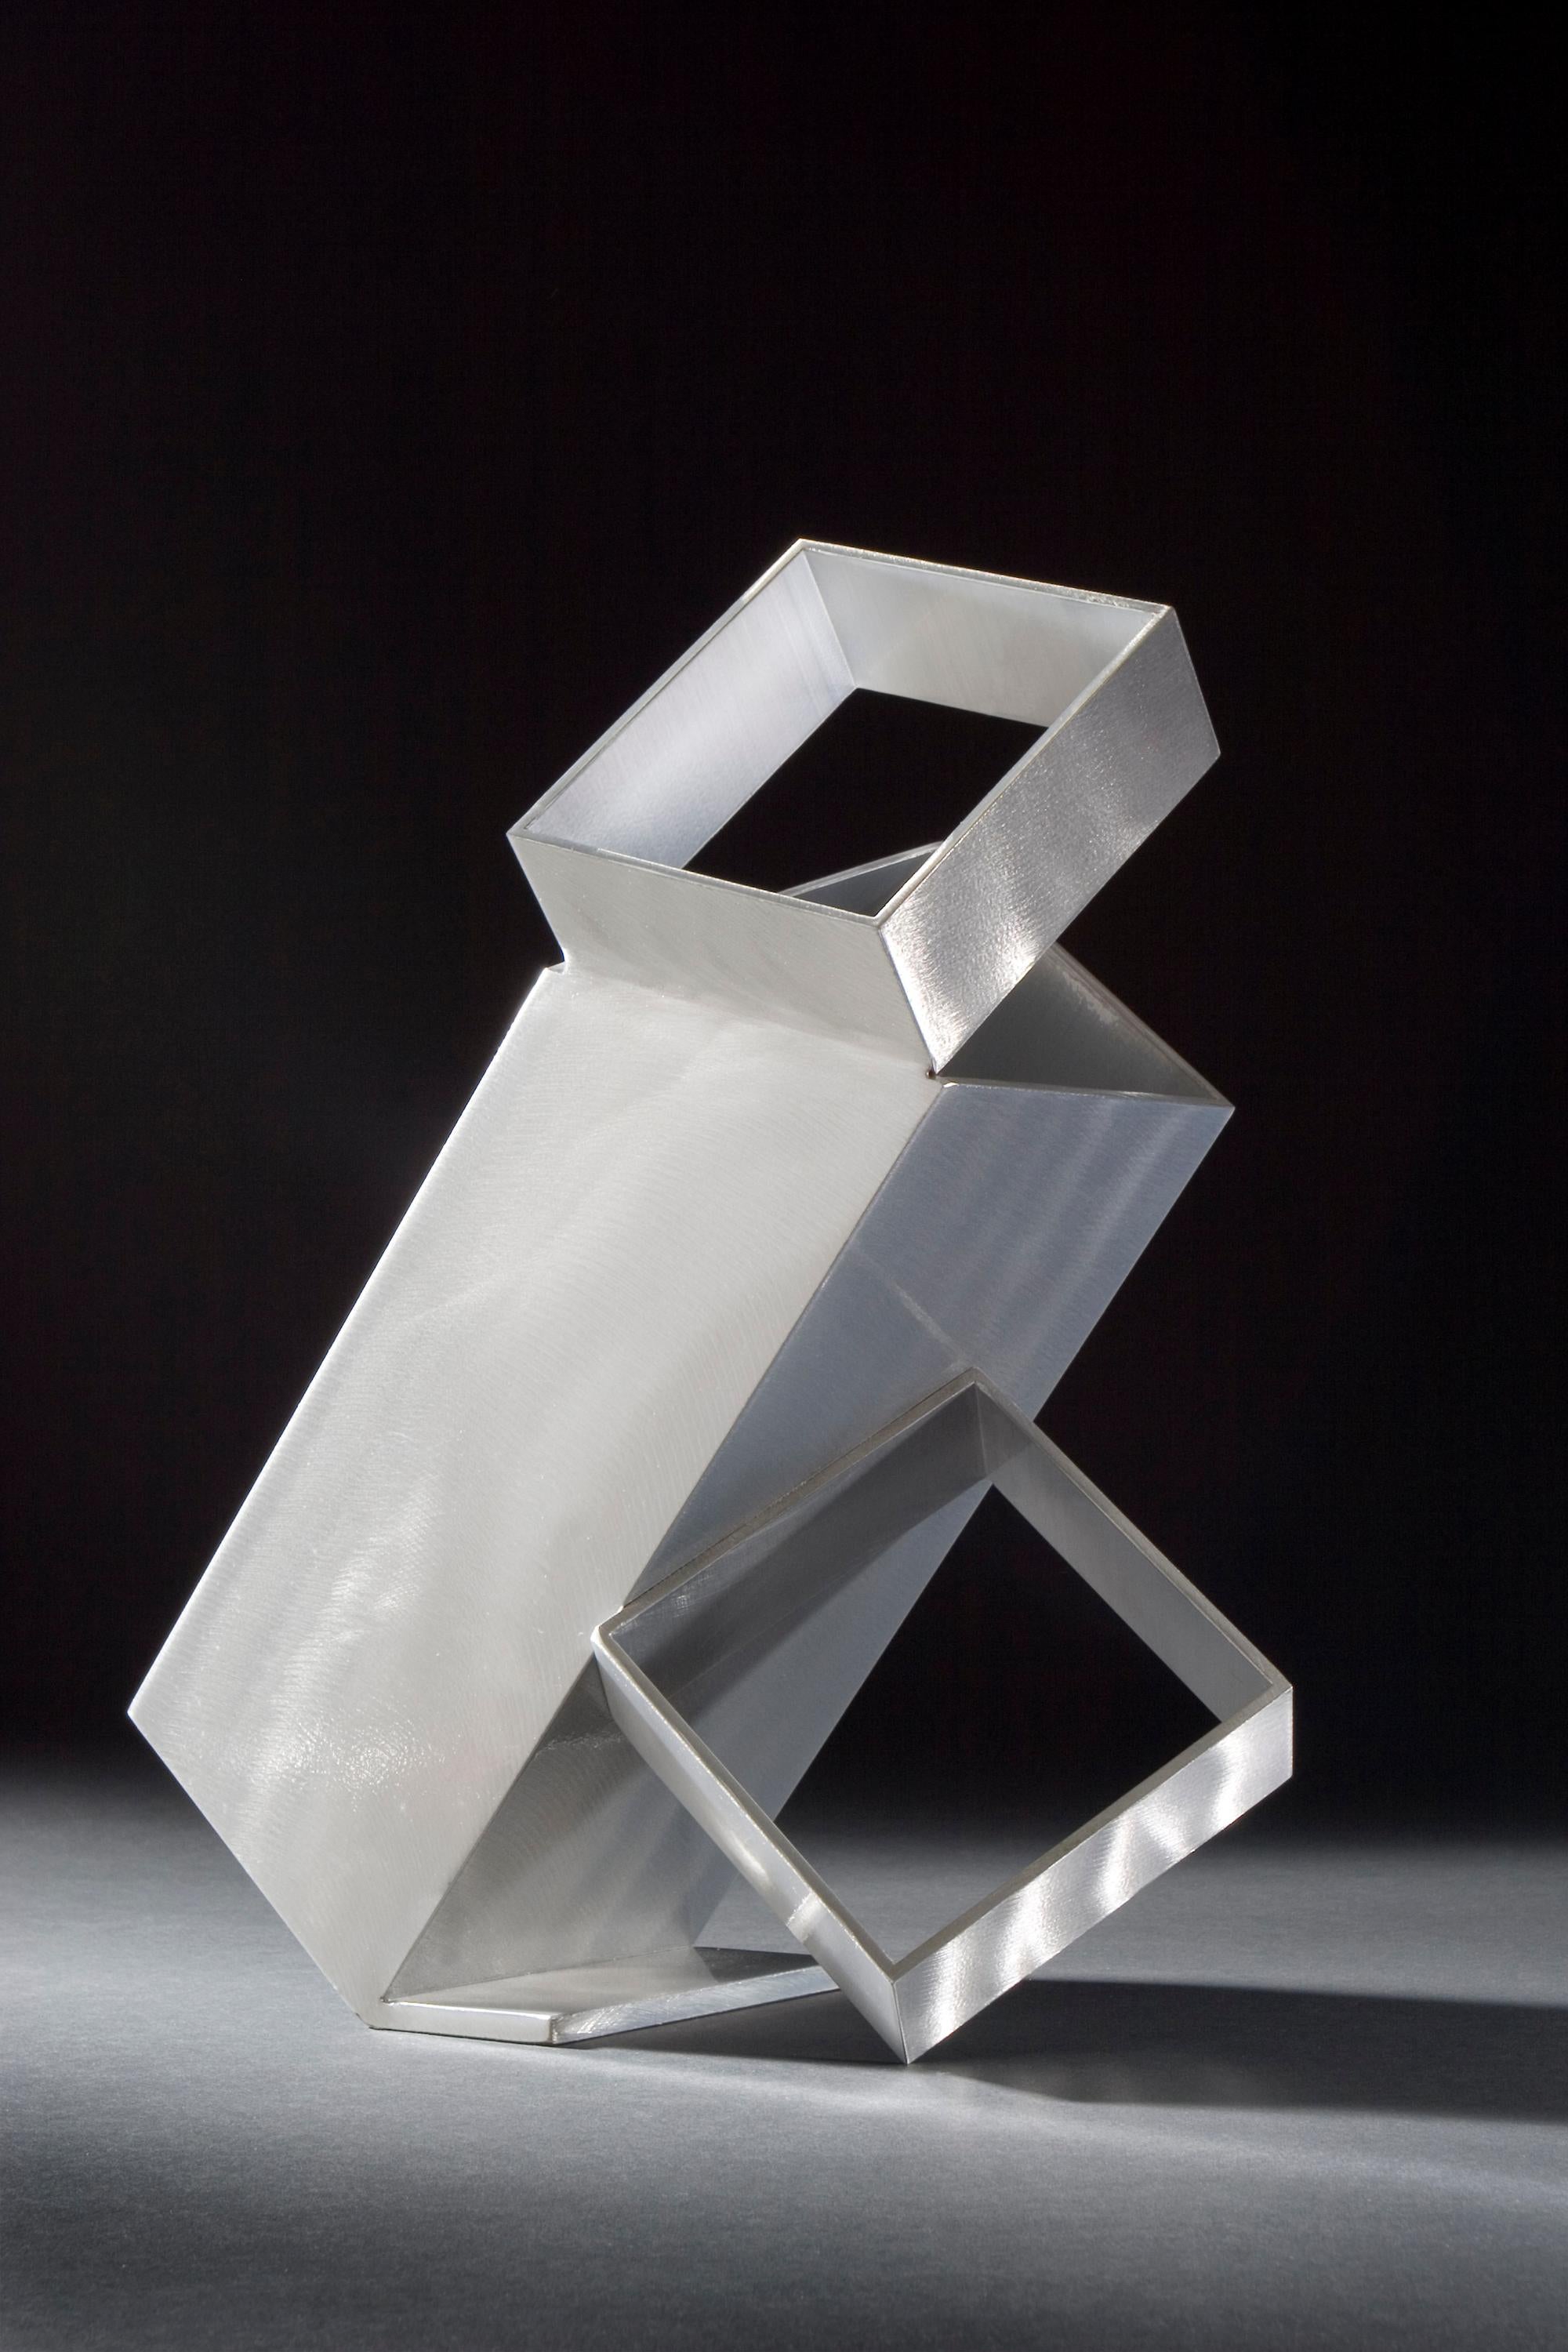 Jane Manus Abstract Sculpture - Box Trot, brushed, welded aluminum table top sculpture